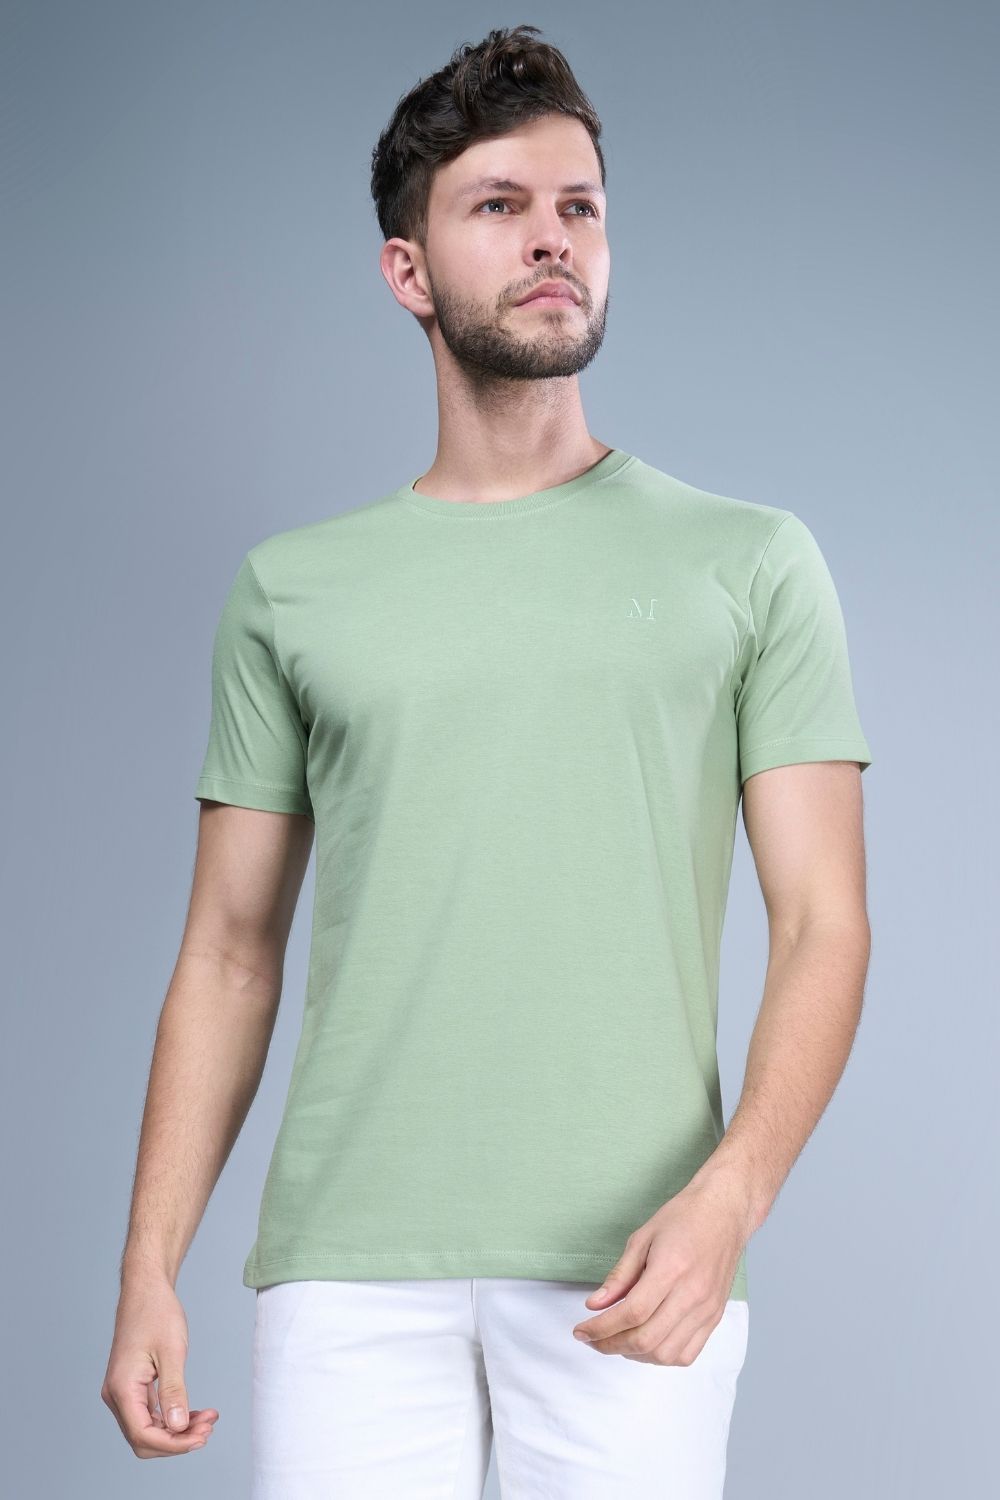 Green colored, cotton Graphic T shirt for men with half sleeves and round neck, front view.